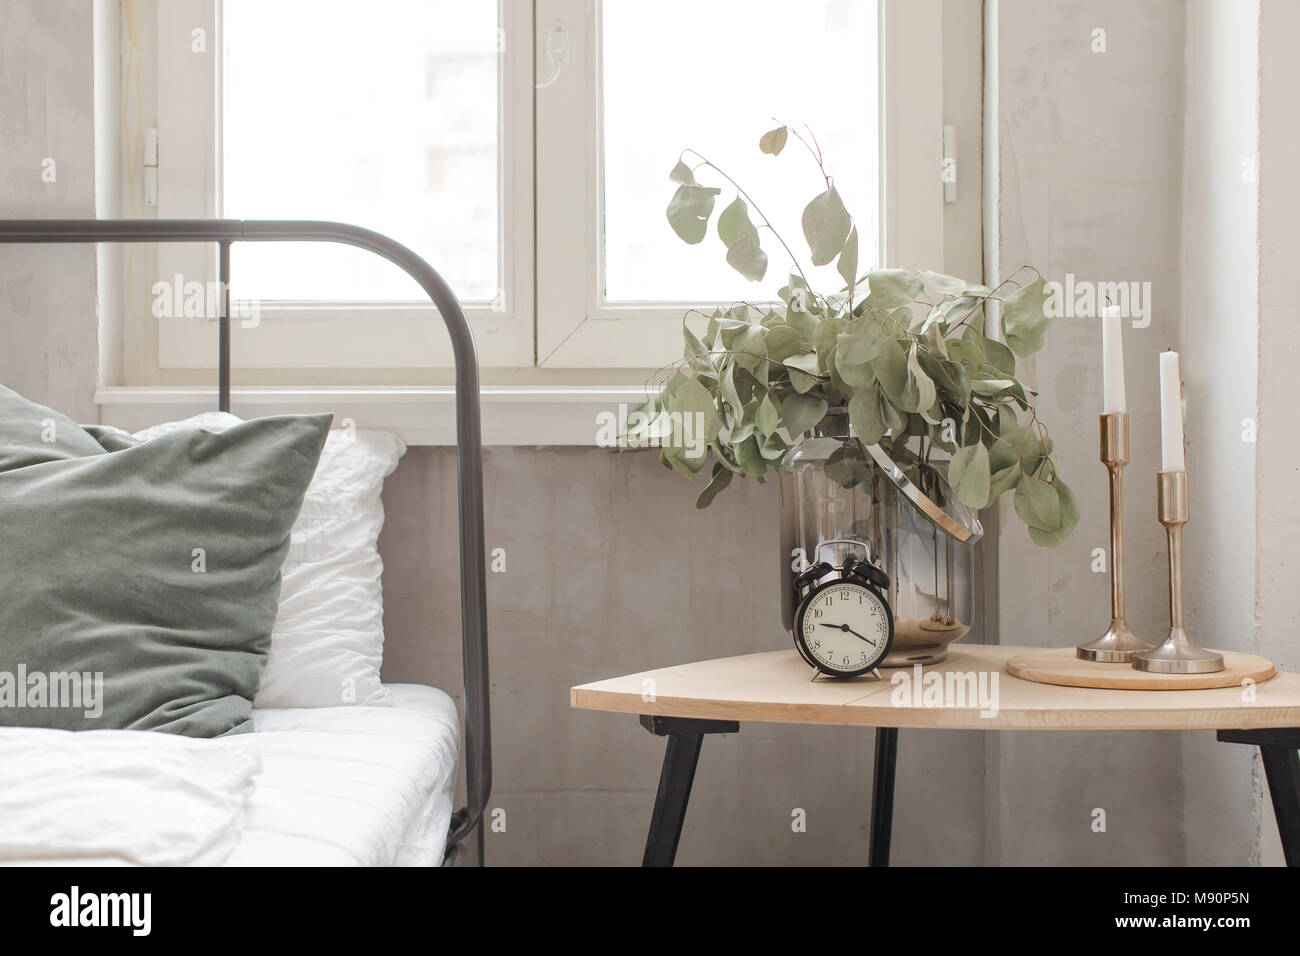 Bedroom interior clock plant pot on wooden table Stock Photo